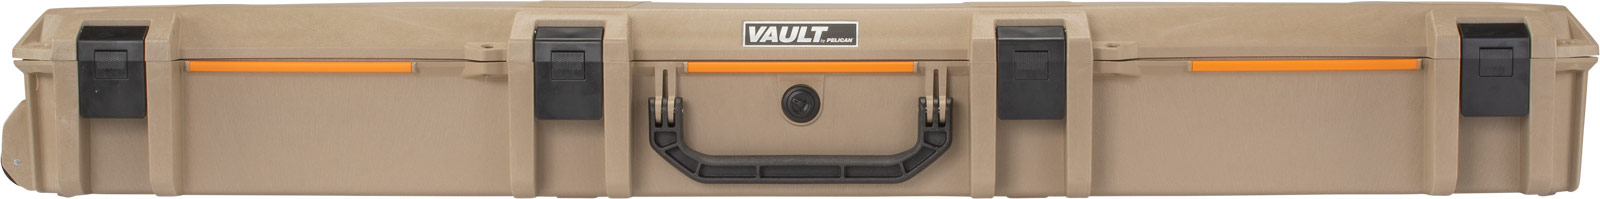 pelican vault v800 two primary weapon case